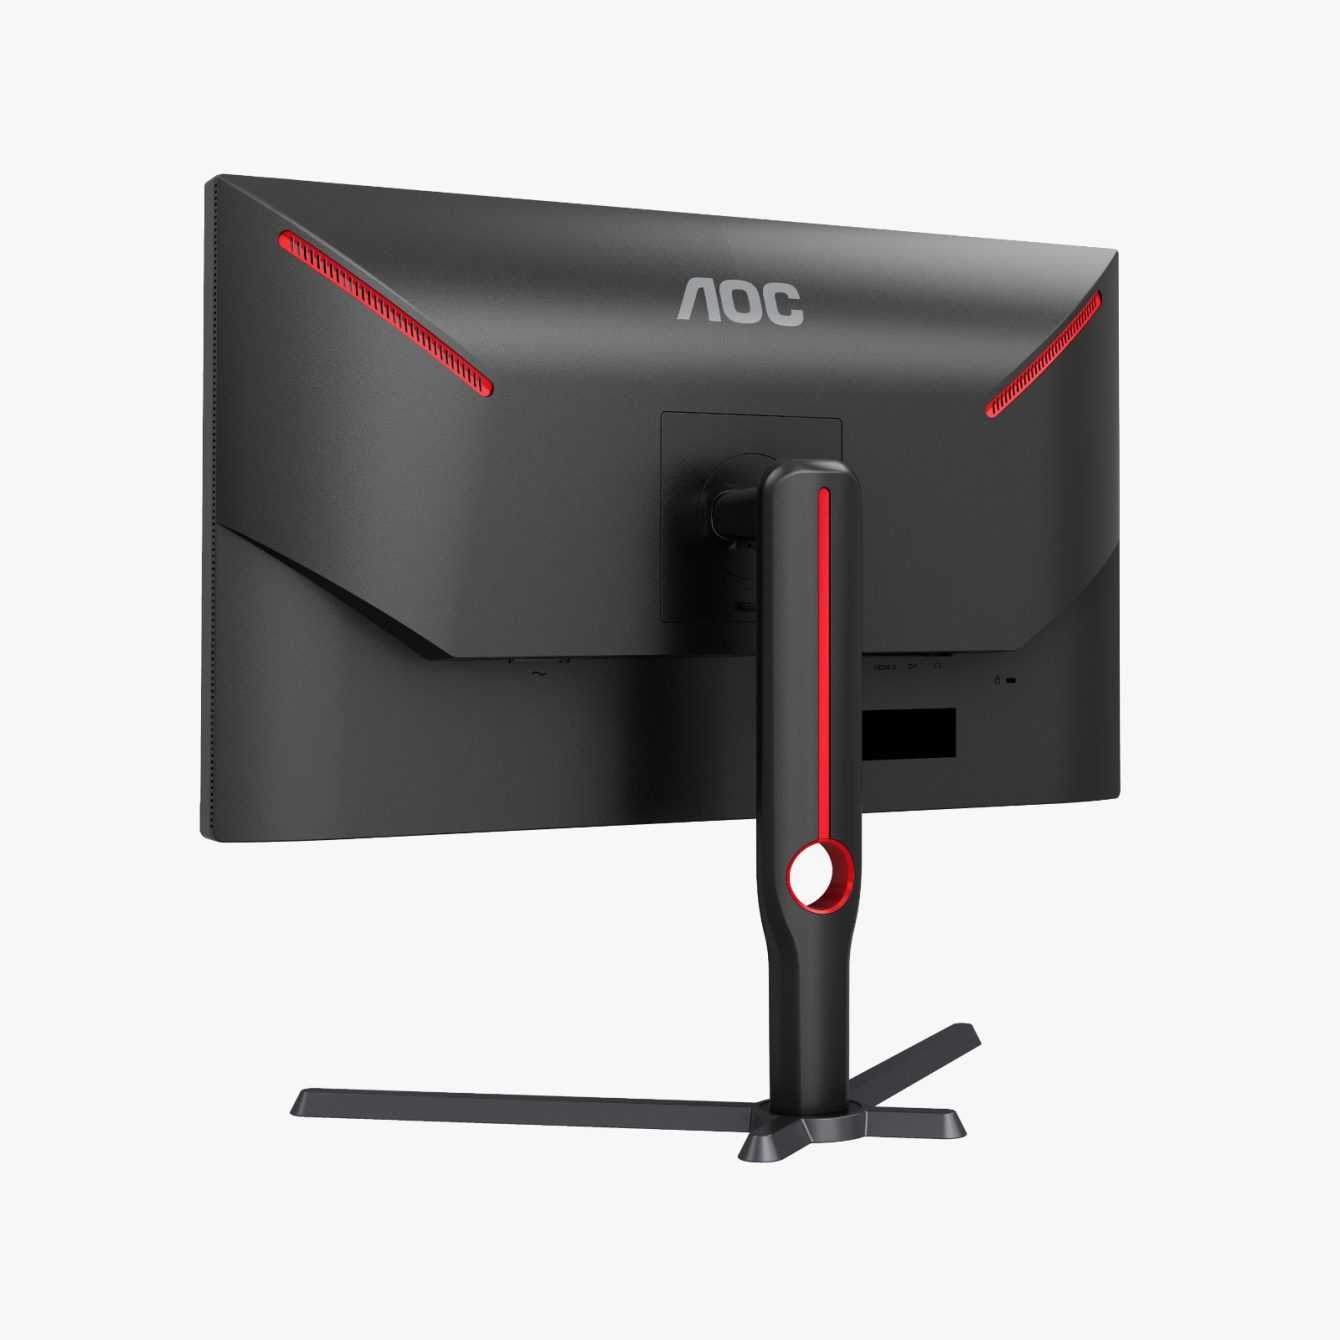 AOC GAMING presents Q27G3XMN/BK, the miniLED accessible to all